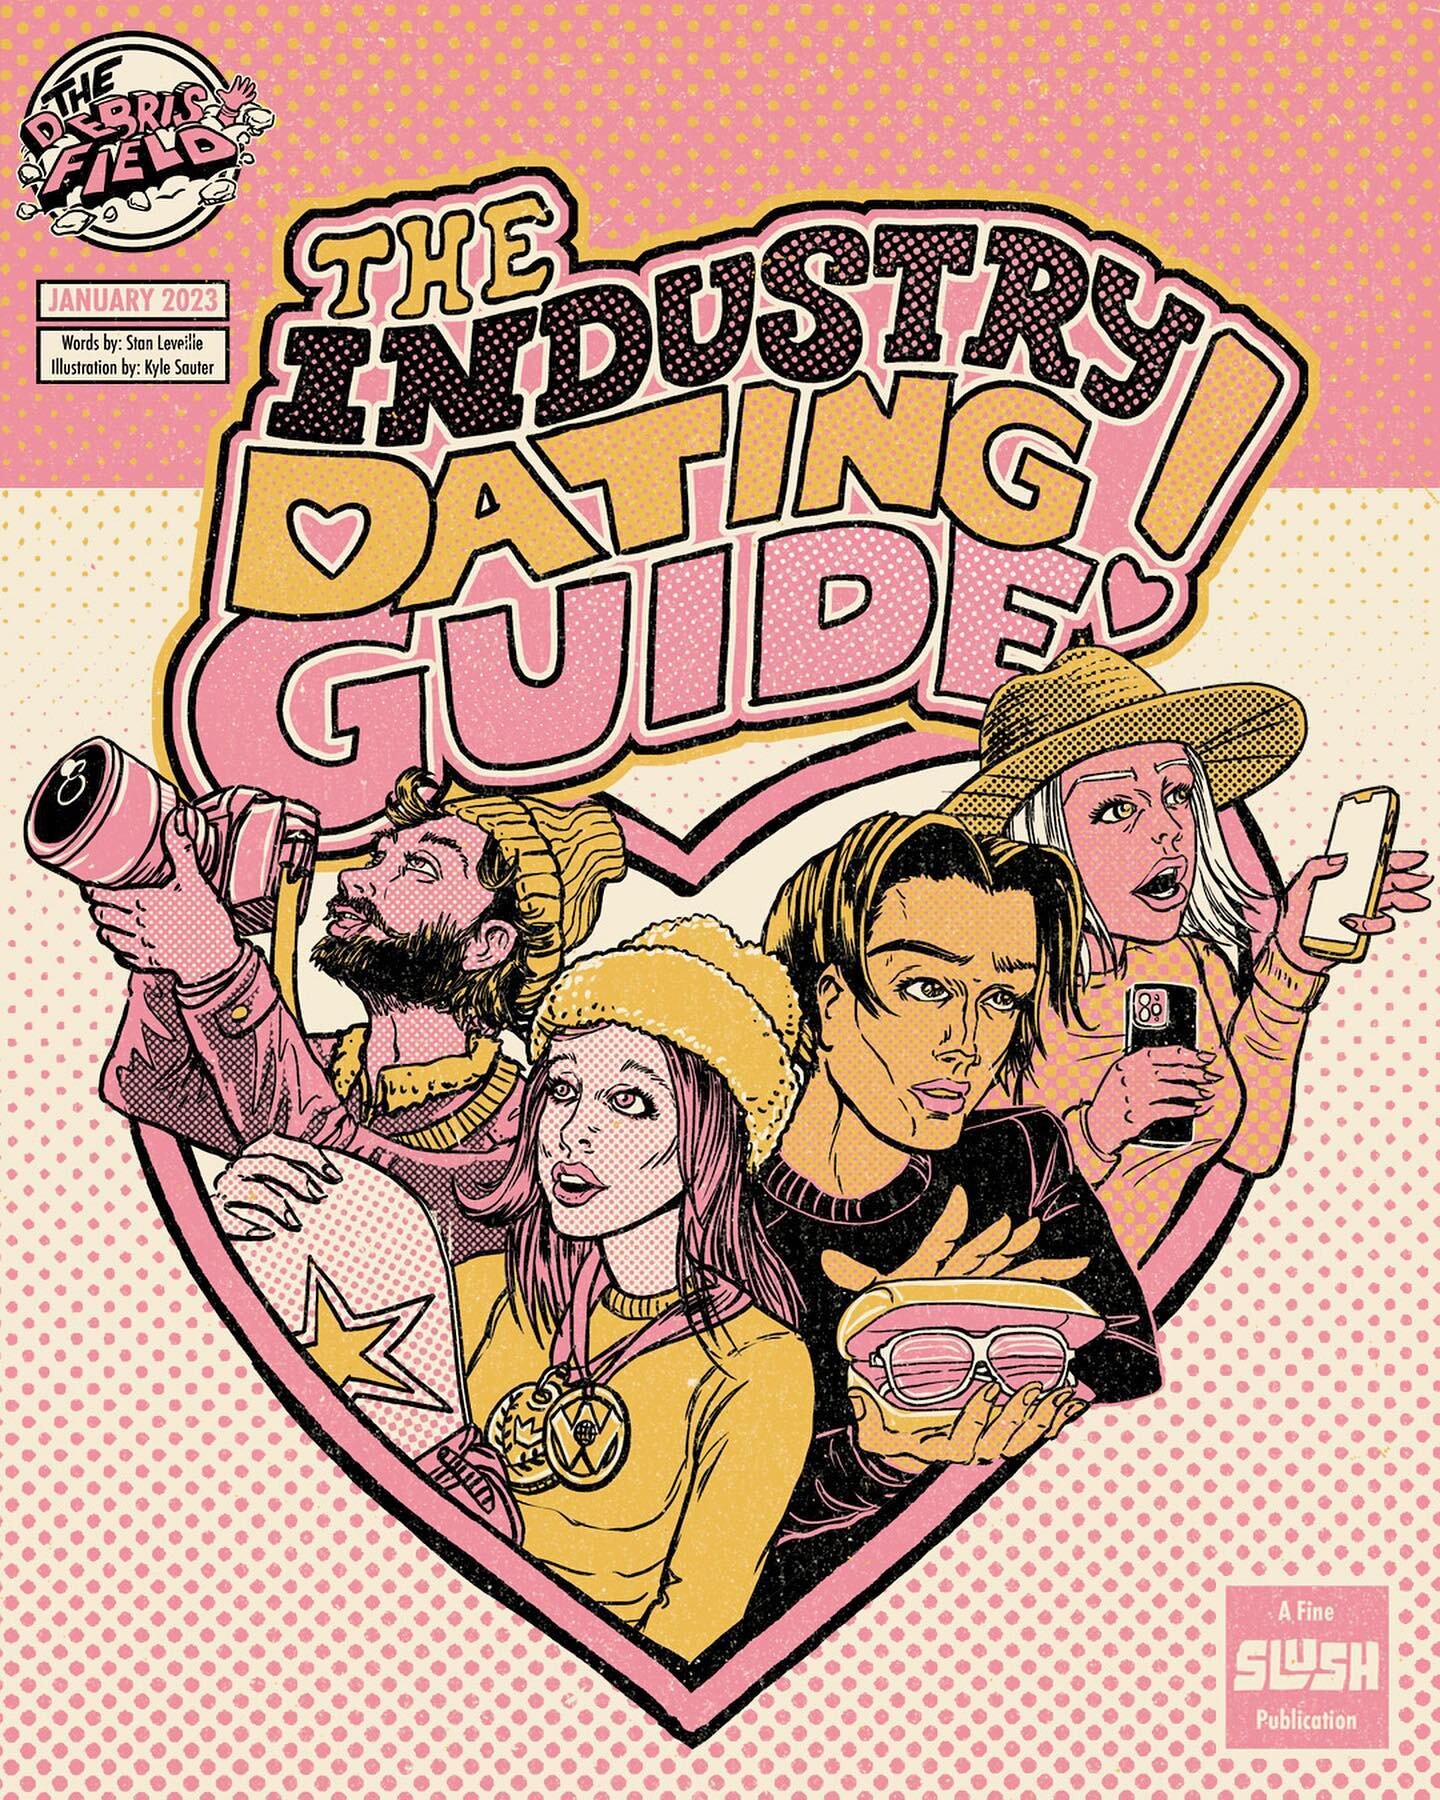 Today&rsquo;s Hallmark holiday feels like the appropriate day to share this &ldquo;Snowboard Industry Dating Guide&rdquo;, as seen in the newest issue of @slushthemagazine. Words by @mysonstan, drawings by me. I think we&rsquo;re really going to help